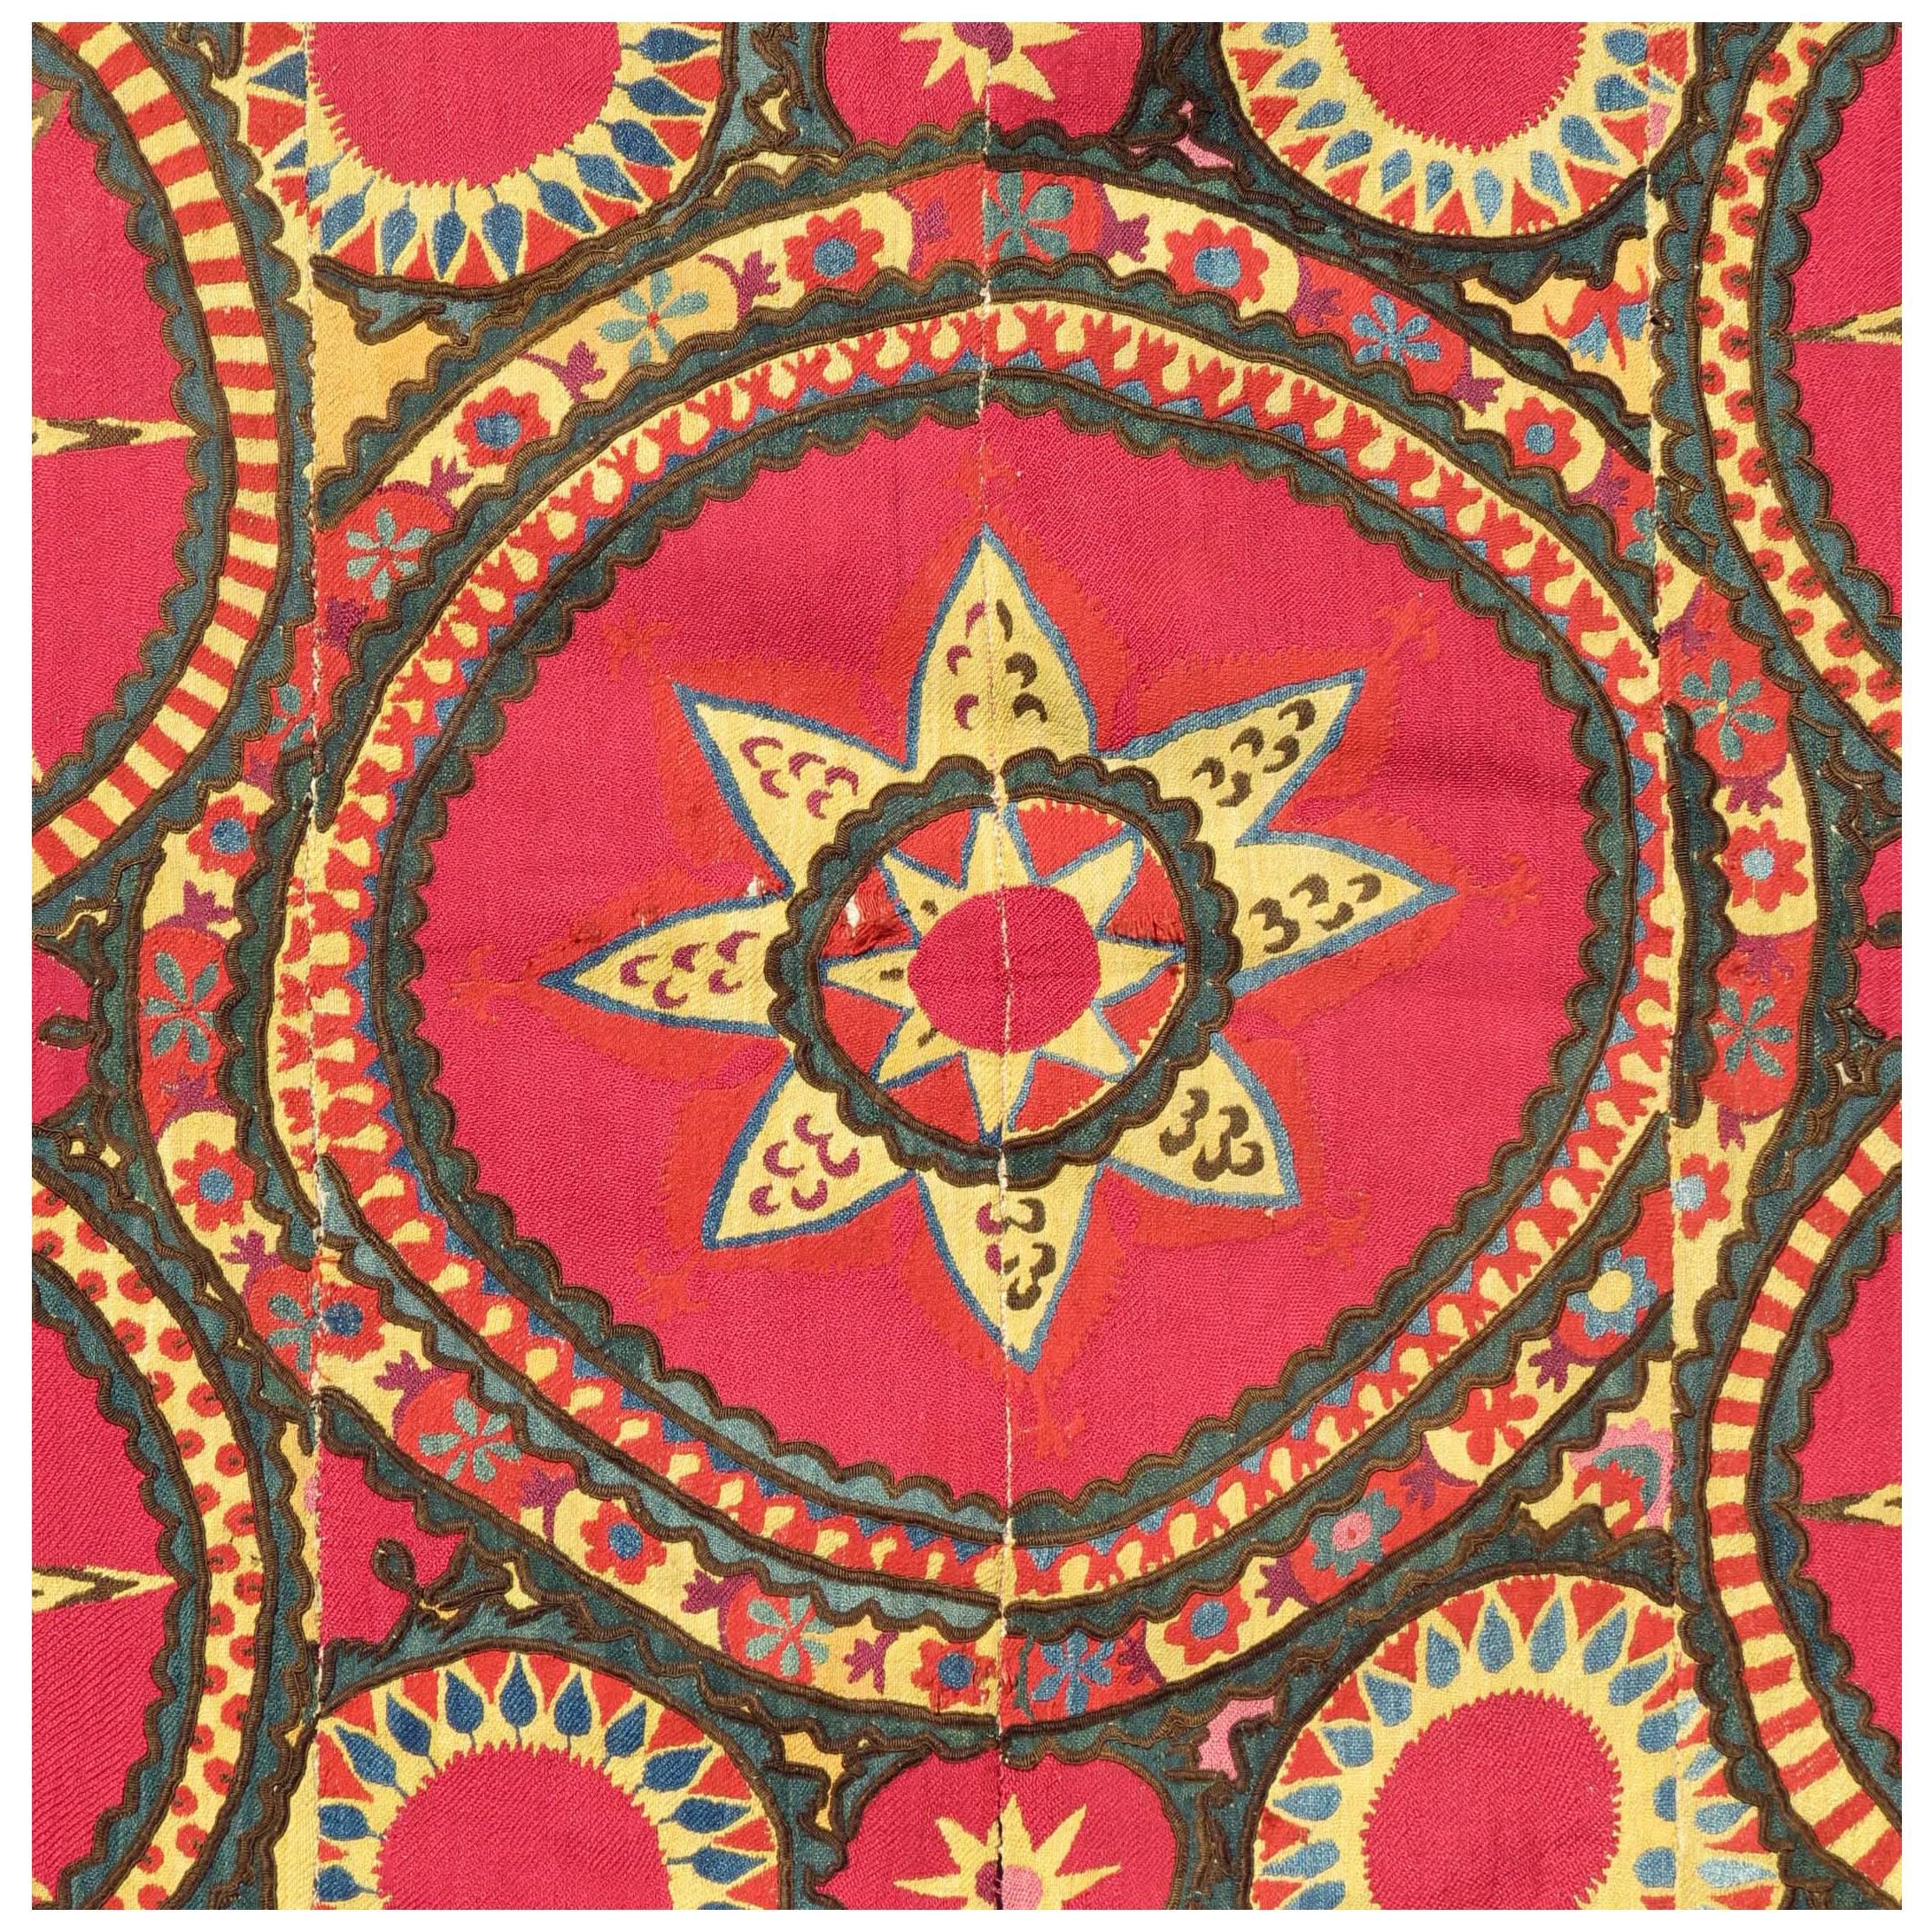 Antique Uzbek Embroidery Bed Cover or Wall Hanging, 19th Century For Sale